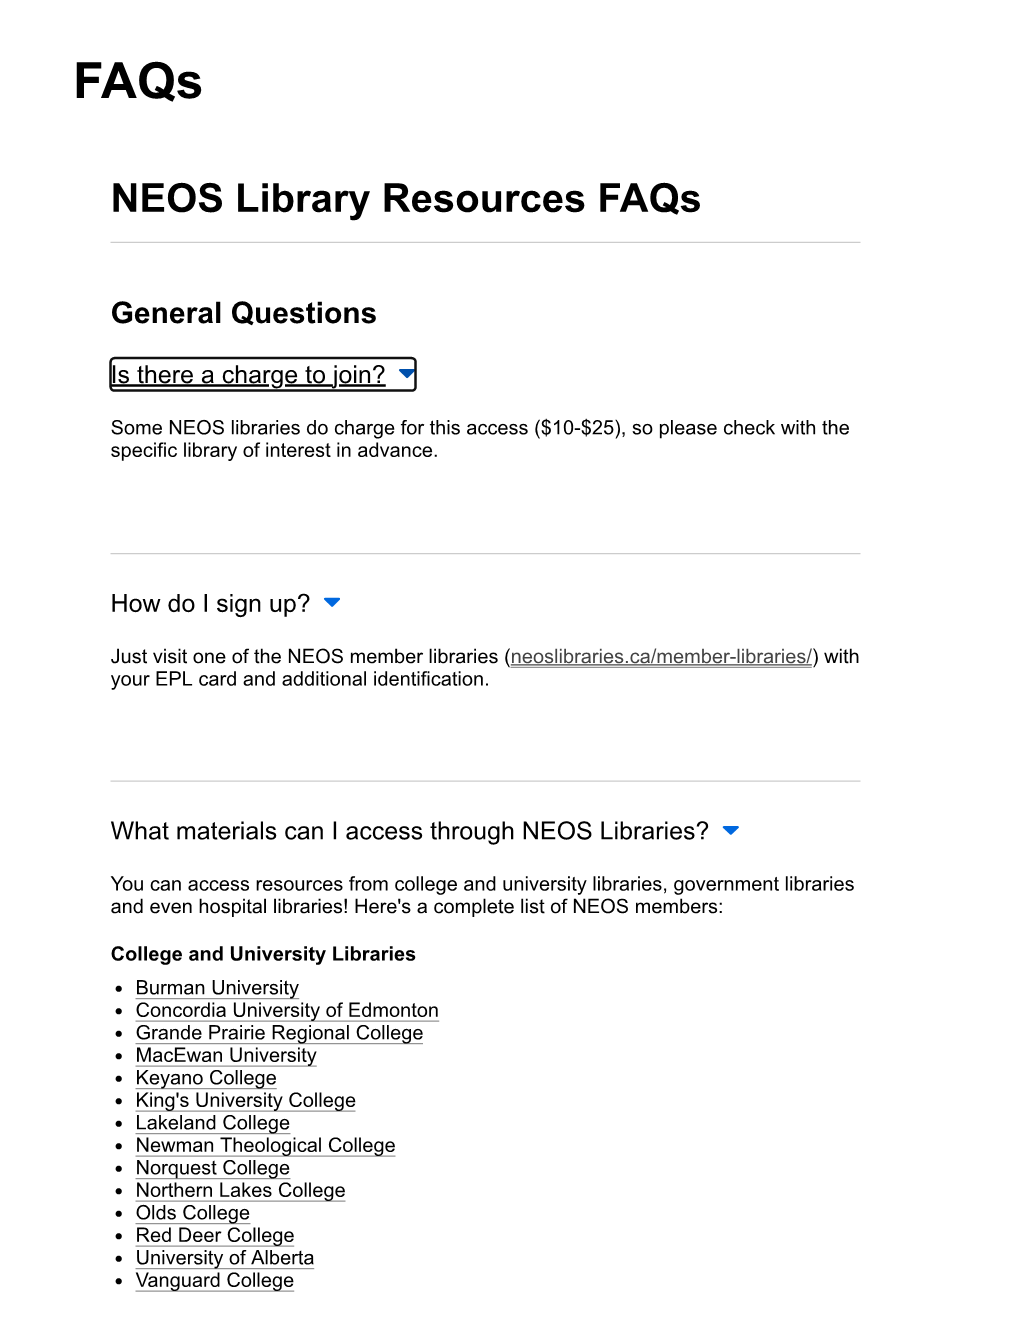 NEOS Library Resources Faqs